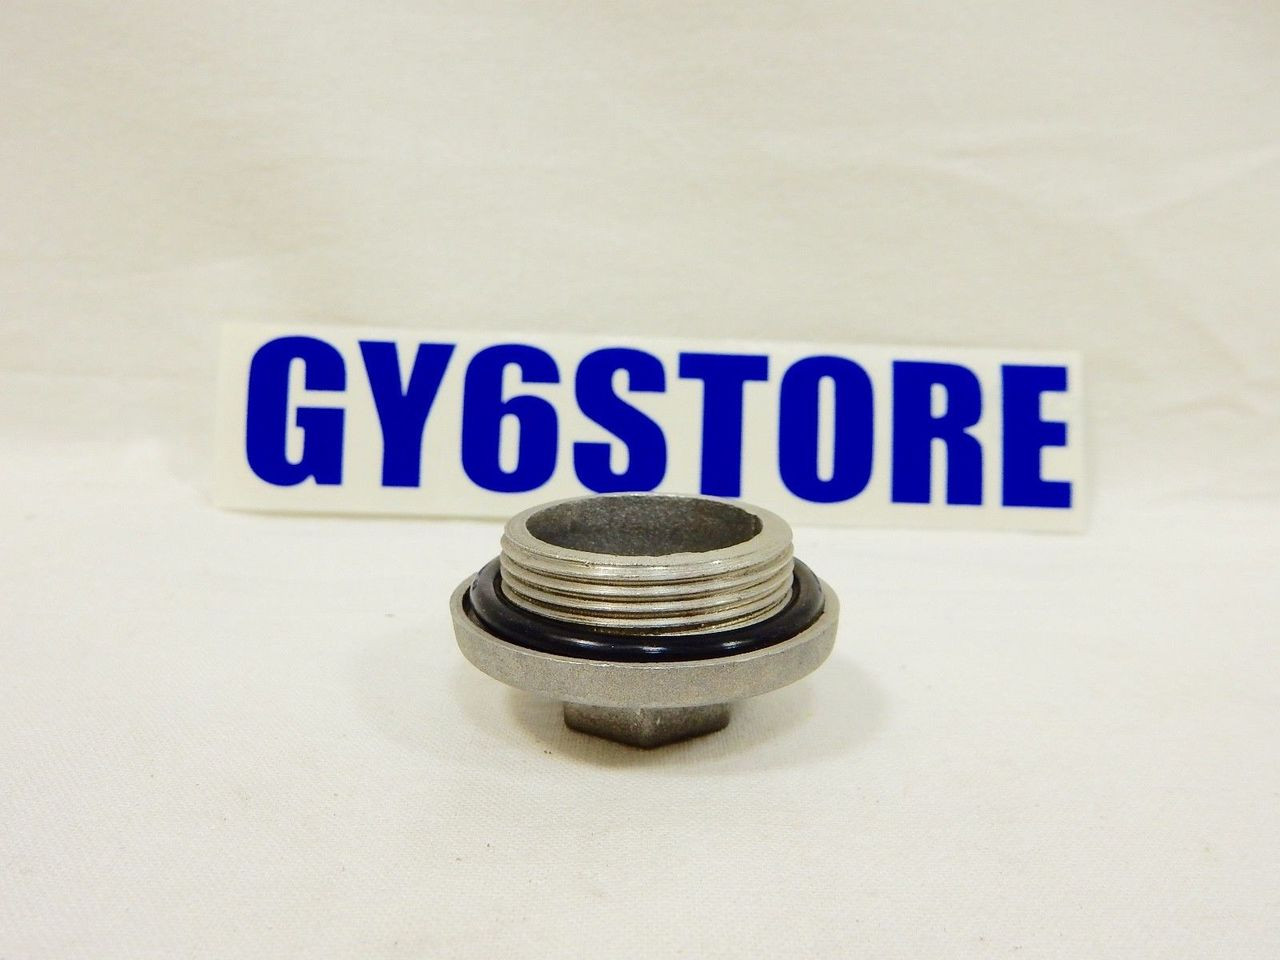 OIL DRAIN PLUG BOLT WITH O-RING FOR 50cc QMB139 & 150cc GY6 MOTORS